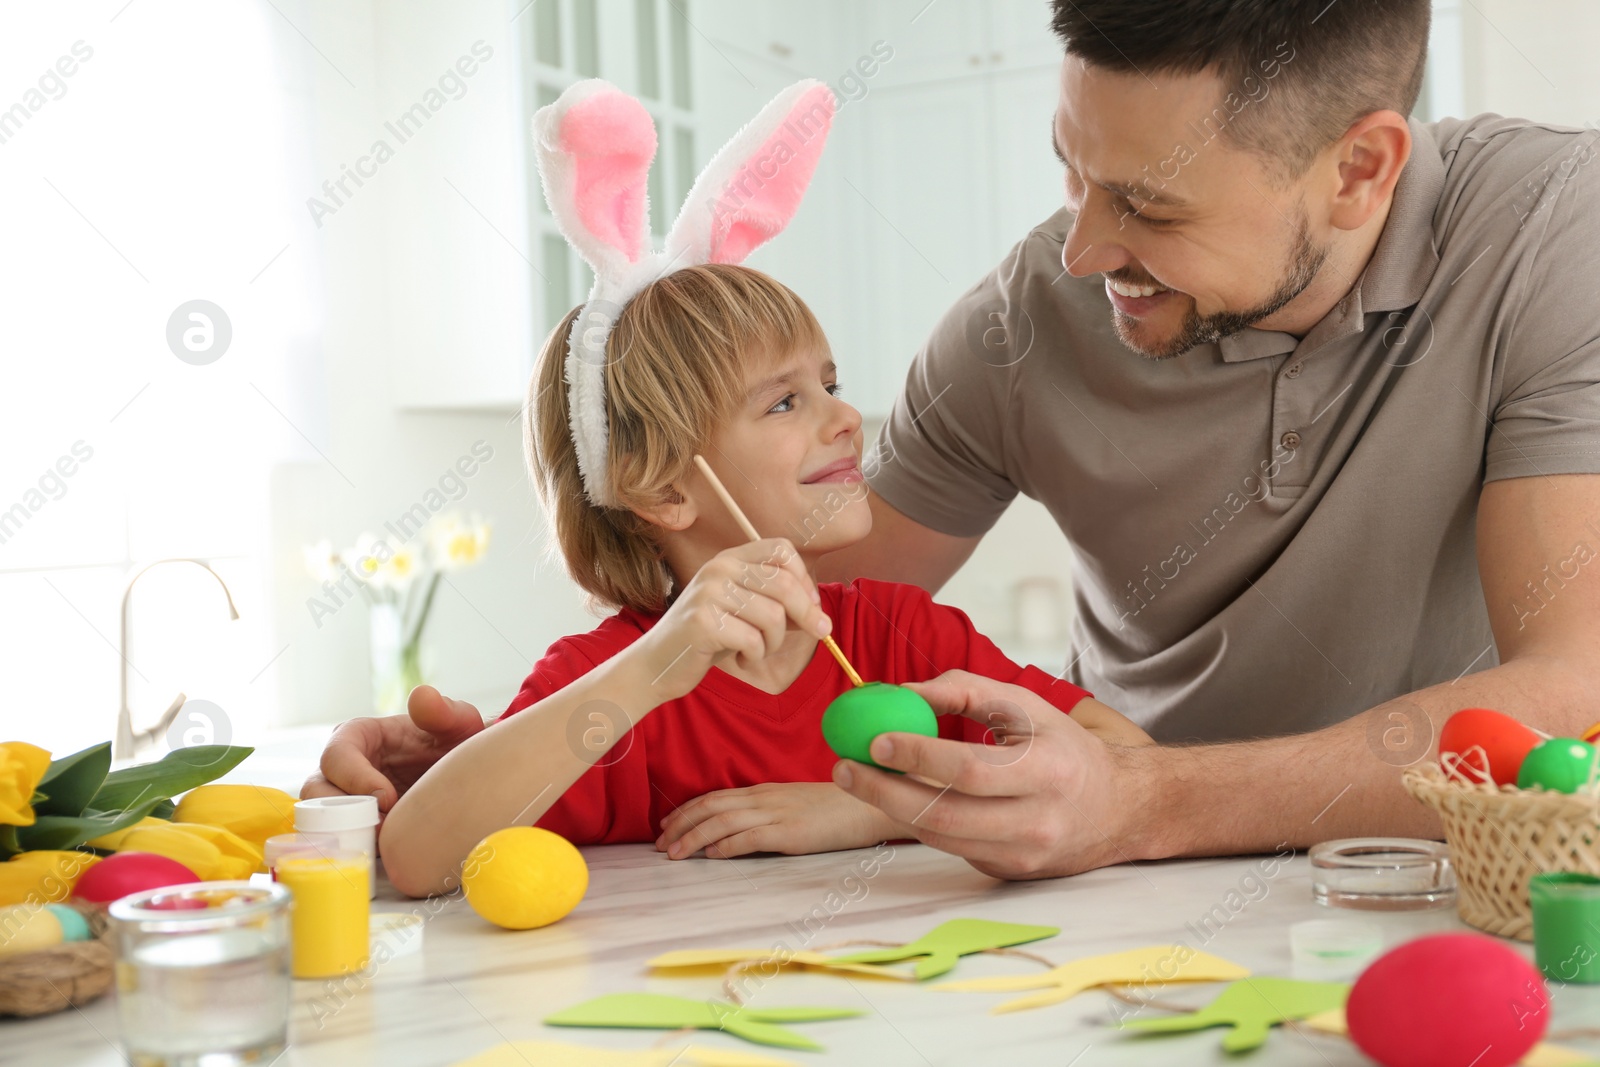 Photo of Happy son with bunny ears headband and his father painting Easter egg at table in kitchen